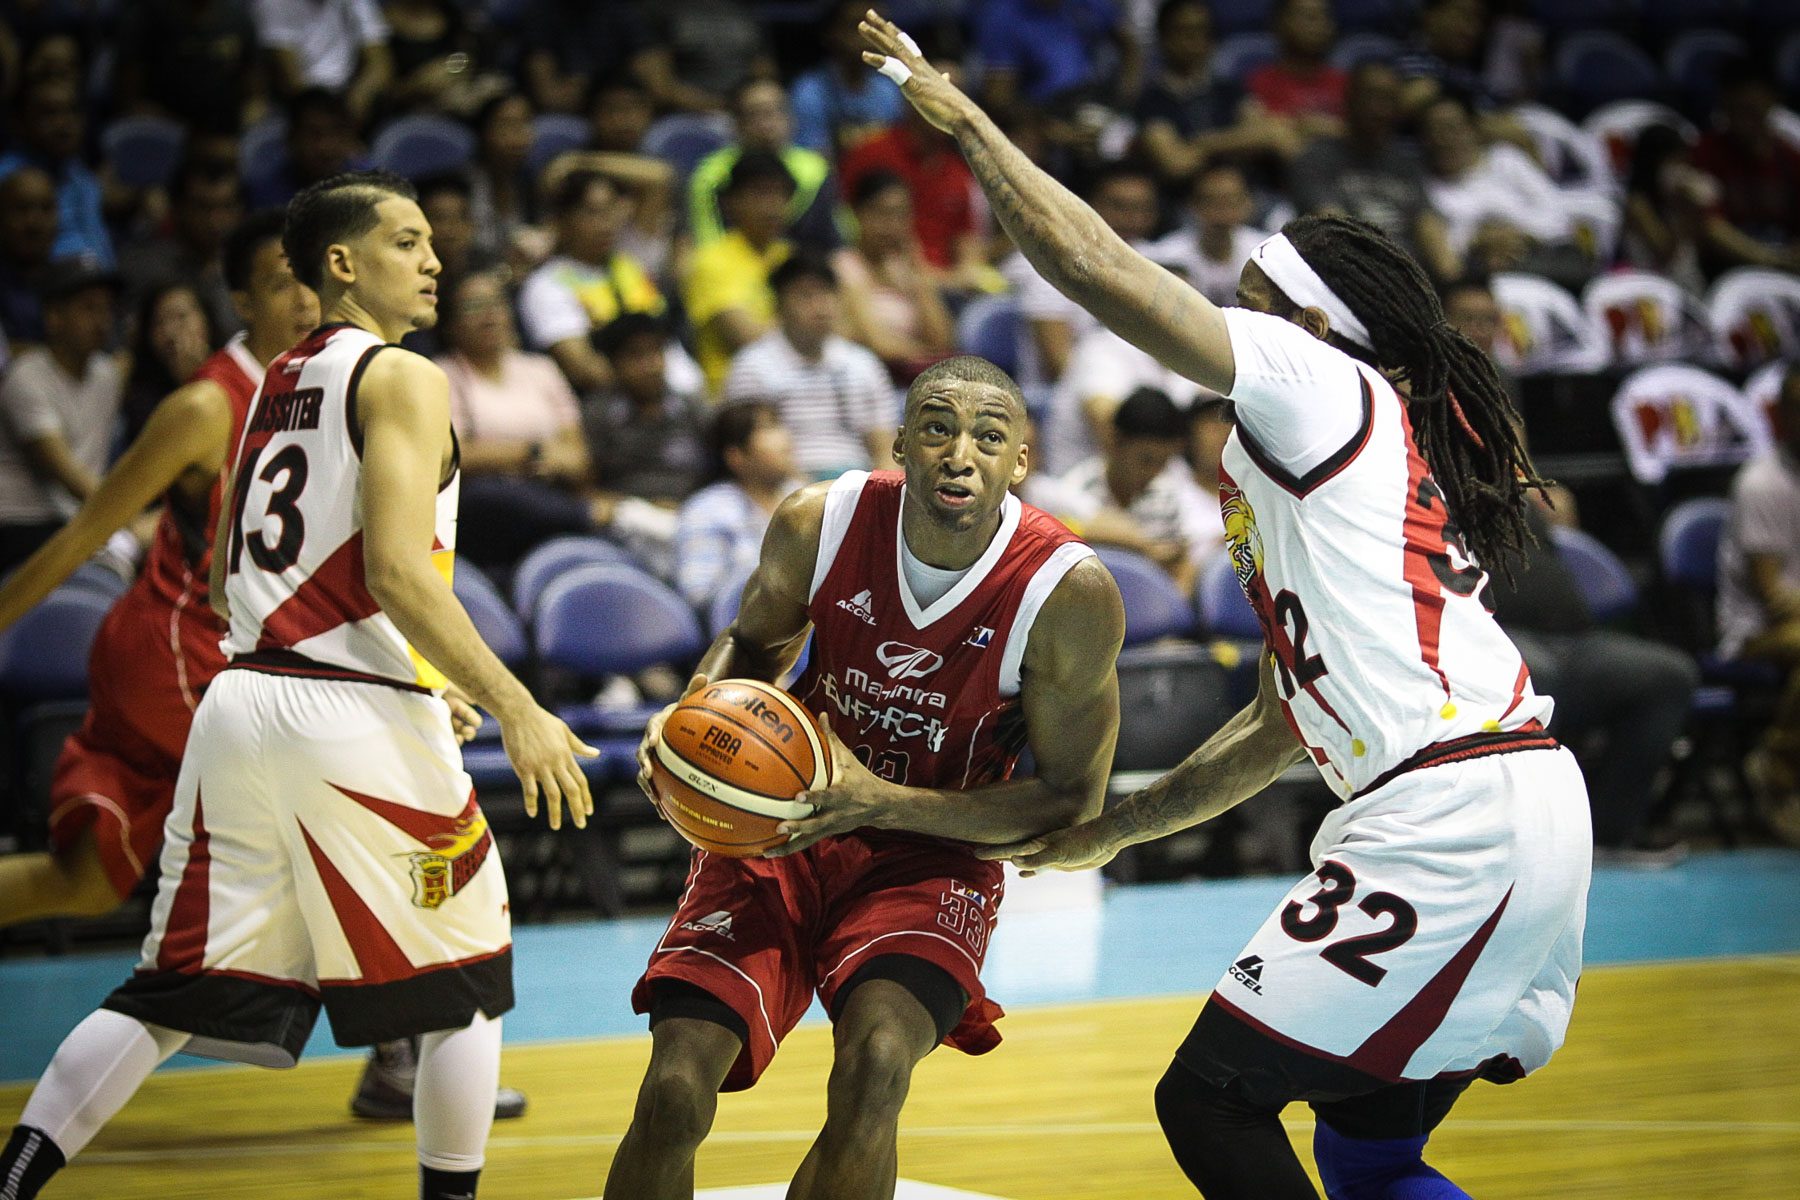 With Pacquiao watching, Mahindra outlasts San Miguel for 3-0 start